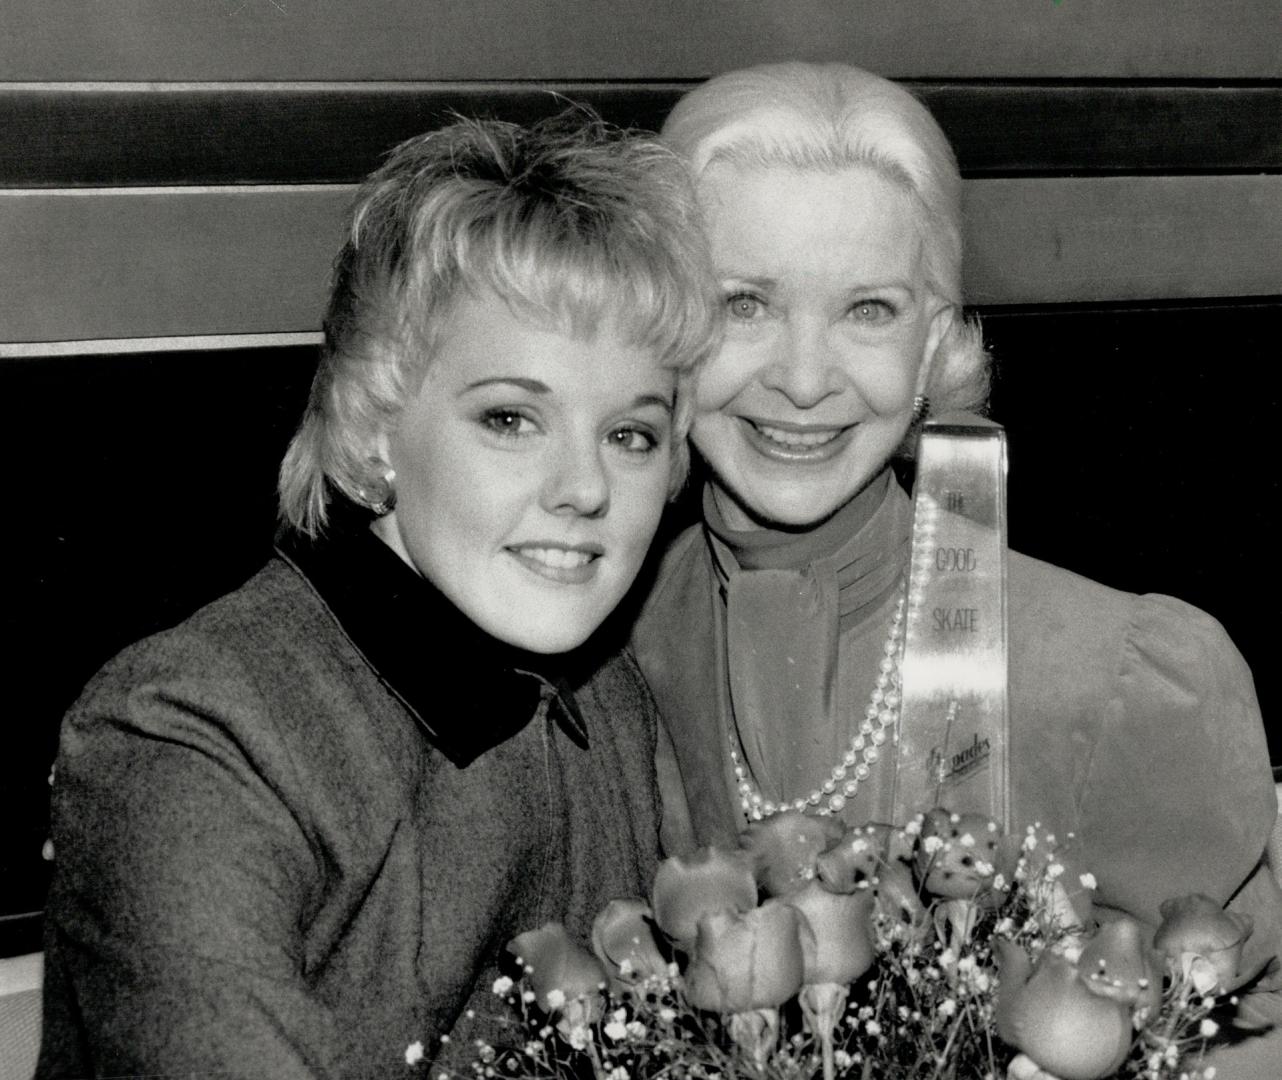 Canada's sweethearts. Elizabeth Manley and Barbara Ann Scott, a couple of figure skating's brightest stars from past and present, got together yesterday in Toronto